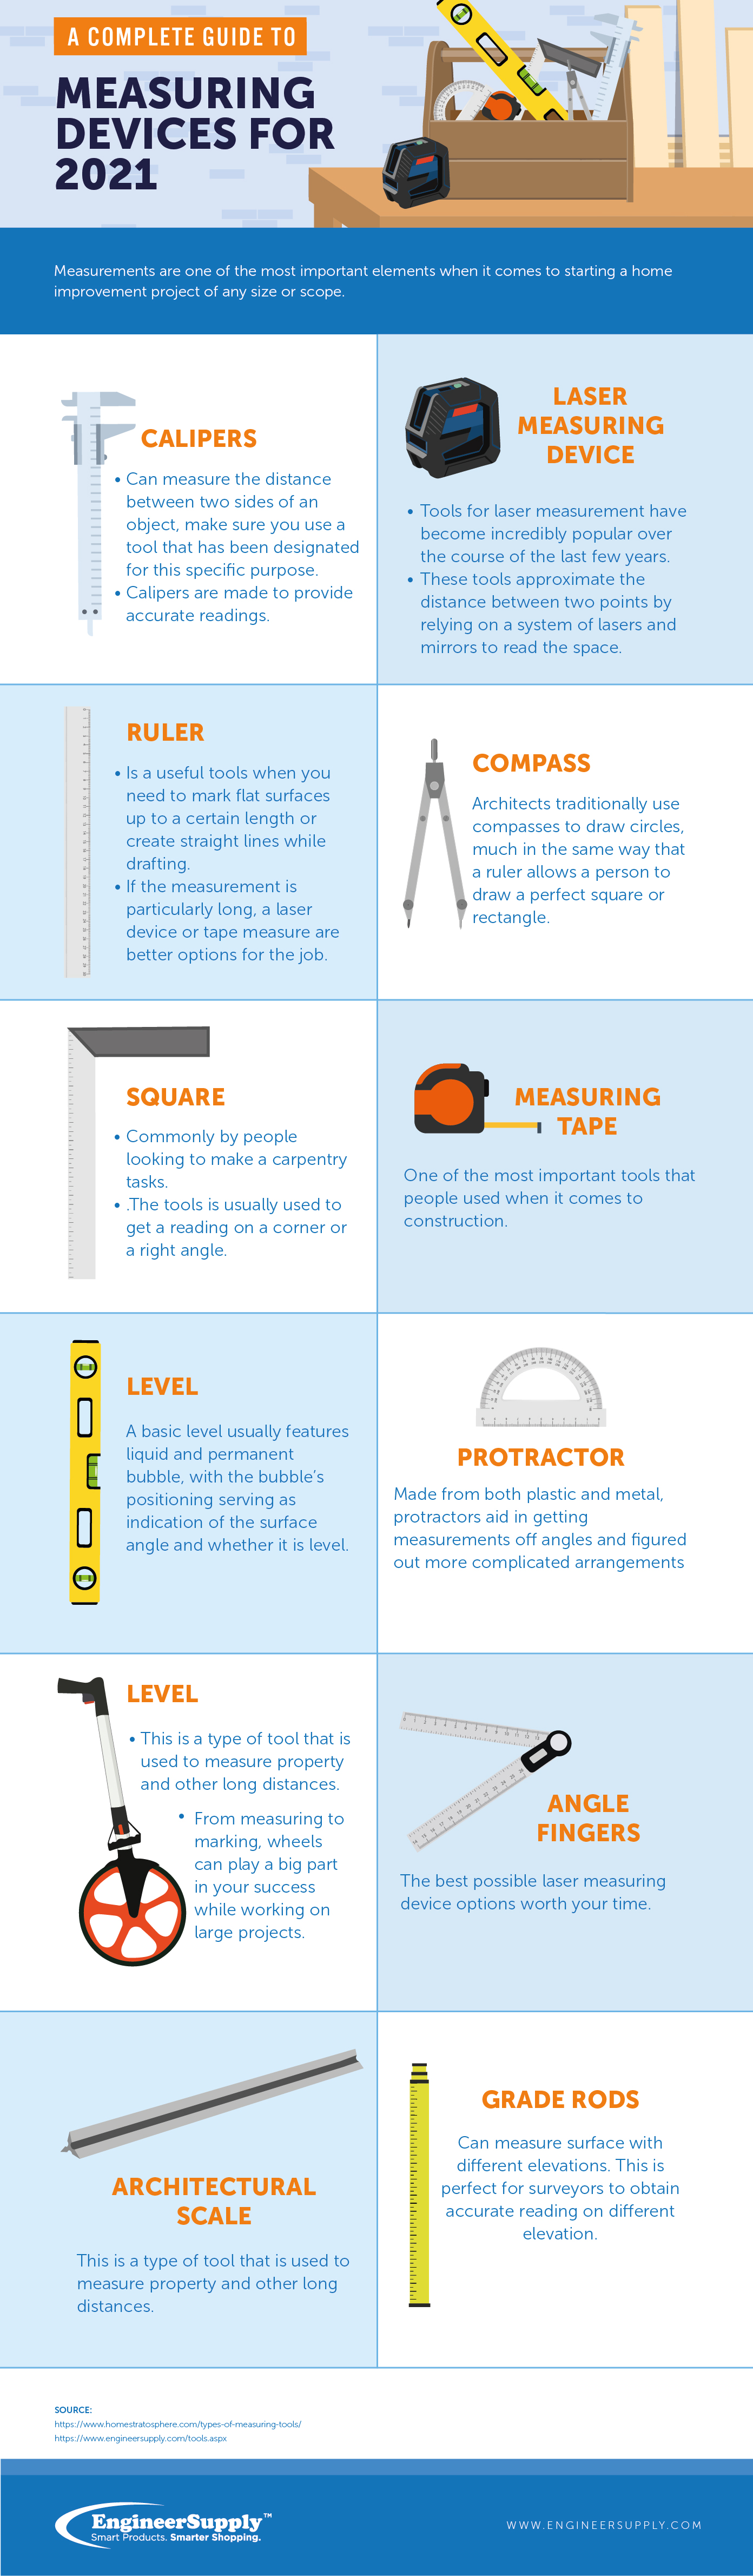 https://www.engineersupply.com/Images/Categories/Content/infographics-measuring-devices-guide-2021.jpg